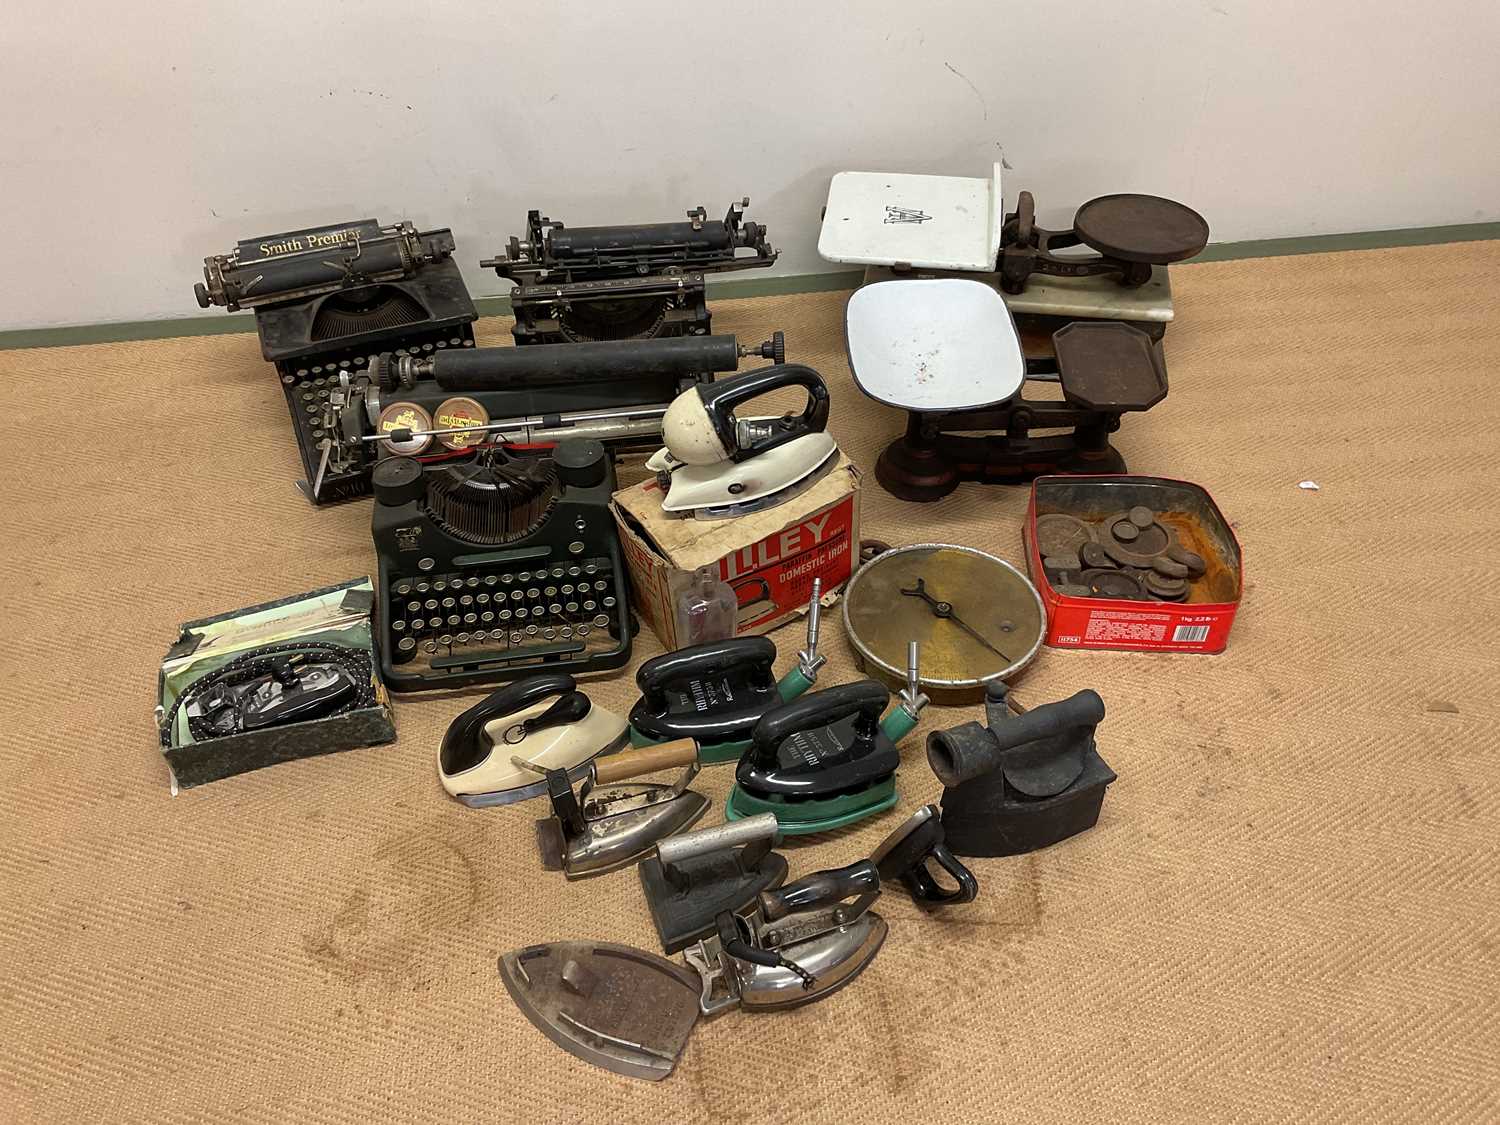 A collection of typewriters, scales including Avery shop scales and weights, vintage irons and other